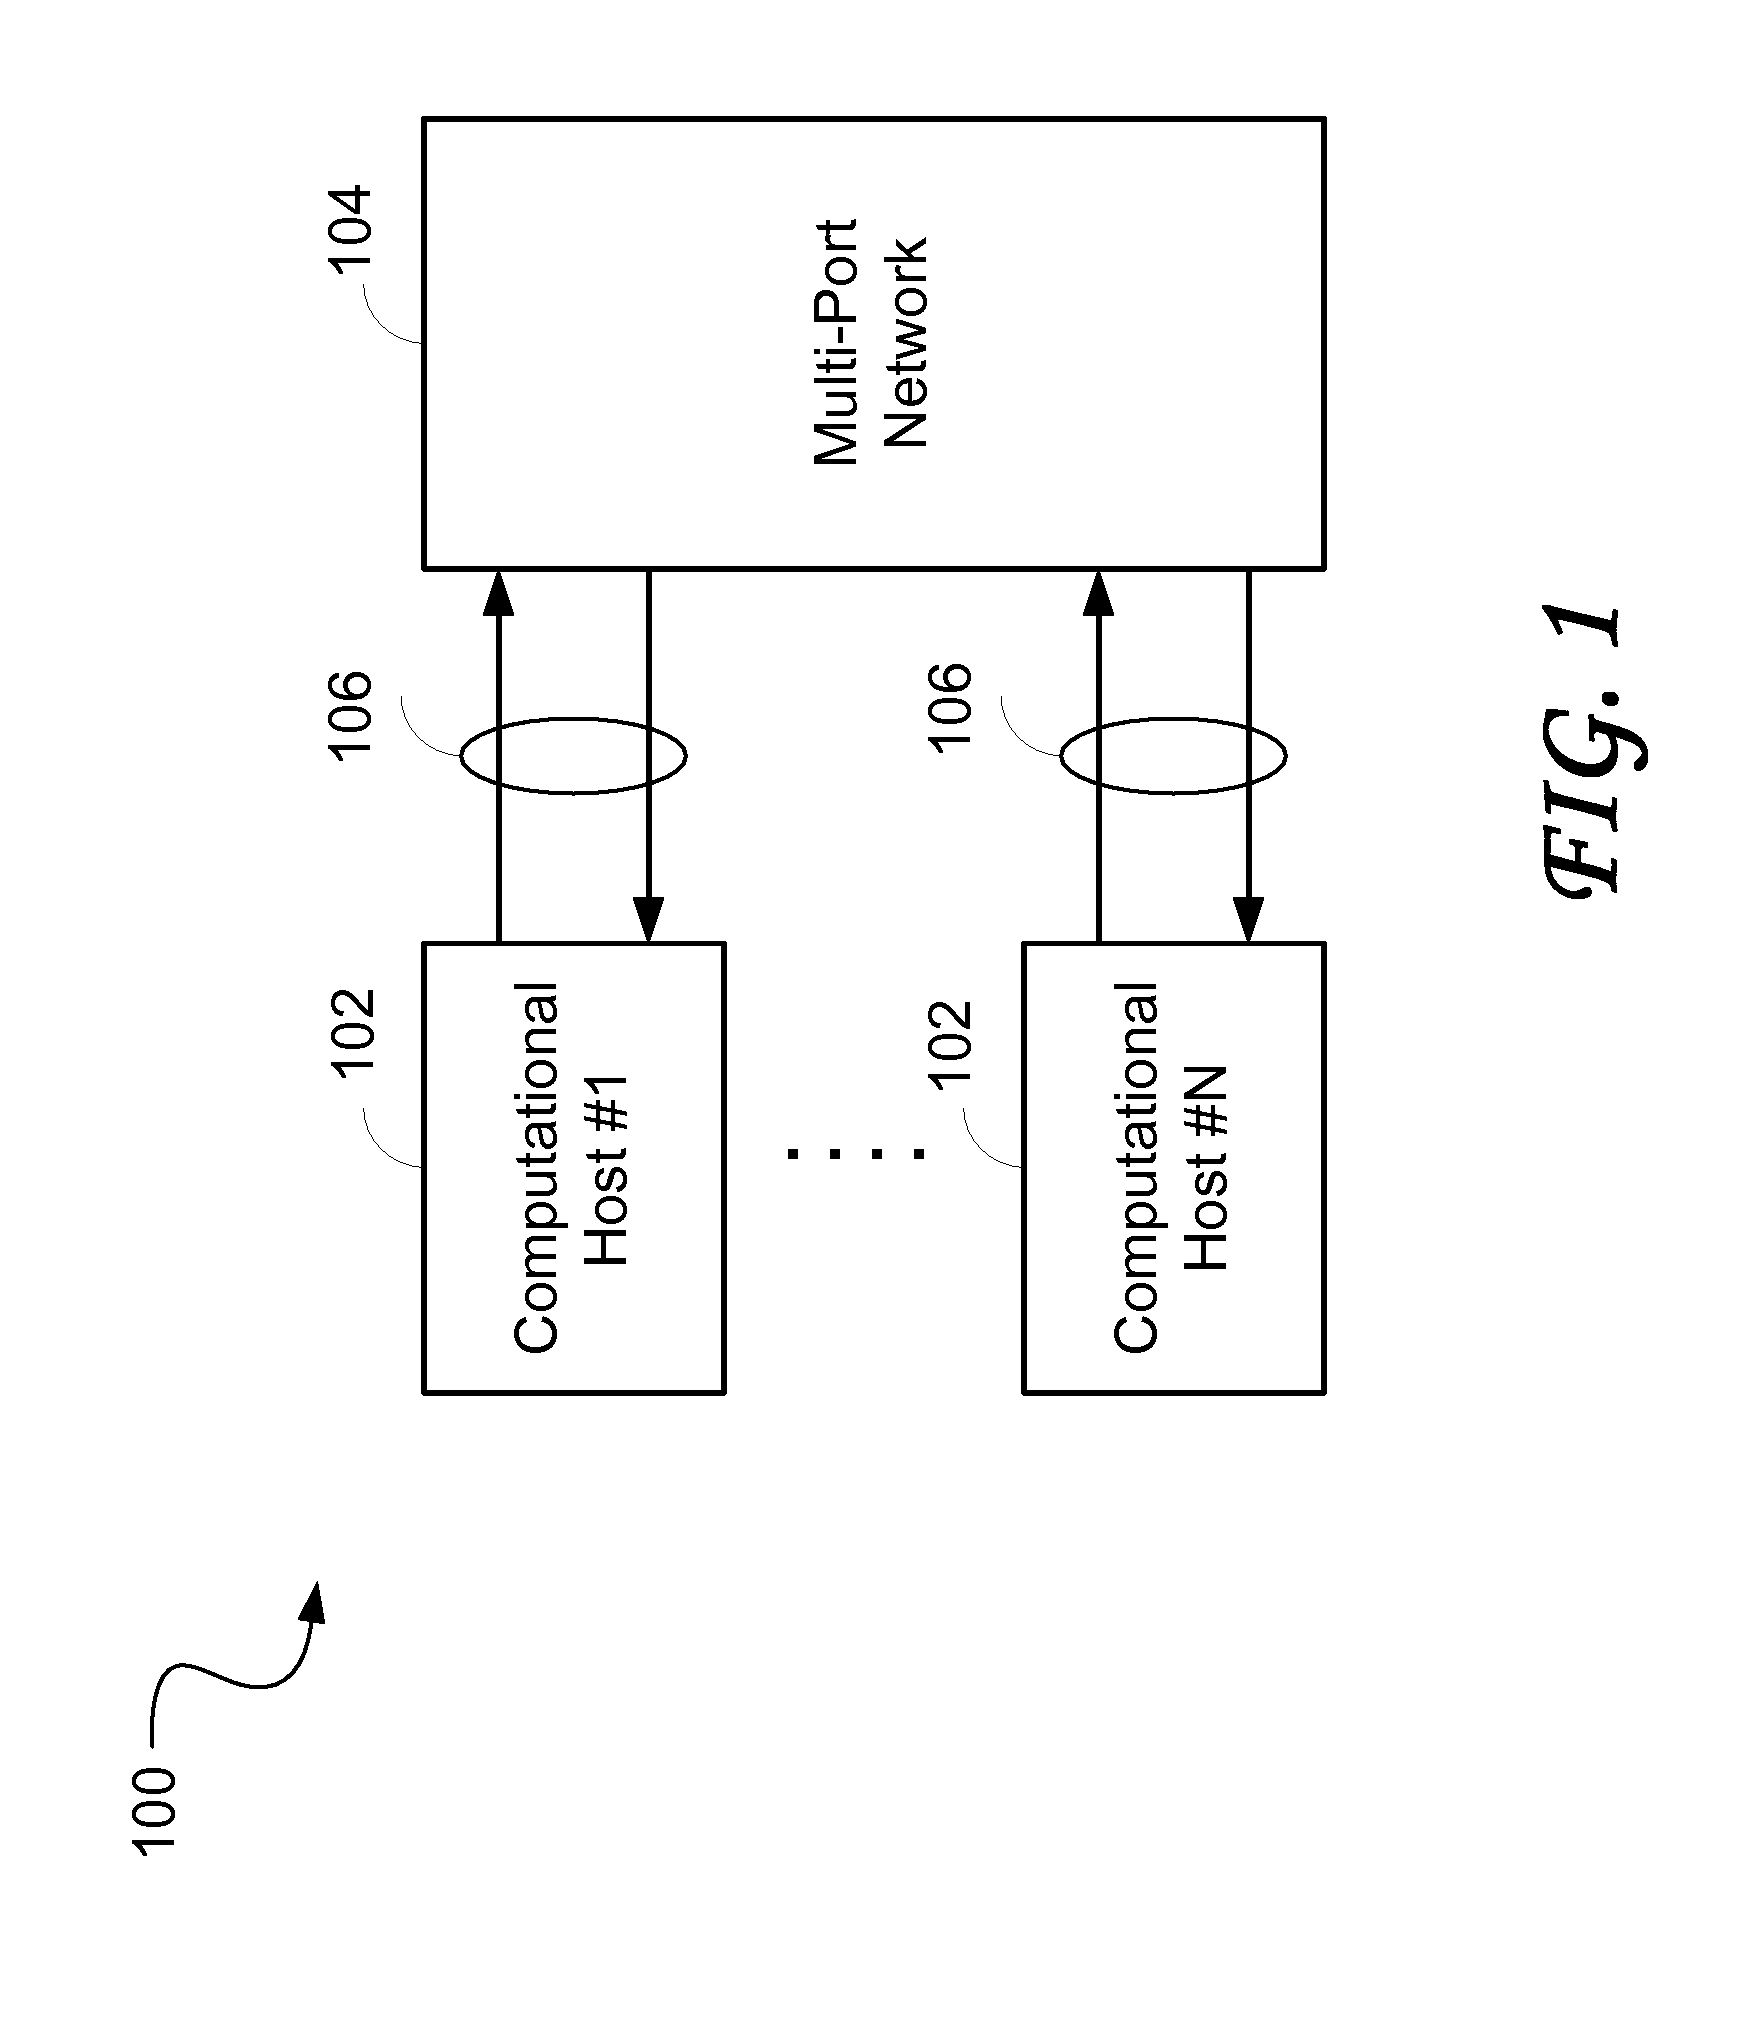 High performance memory based communications interface